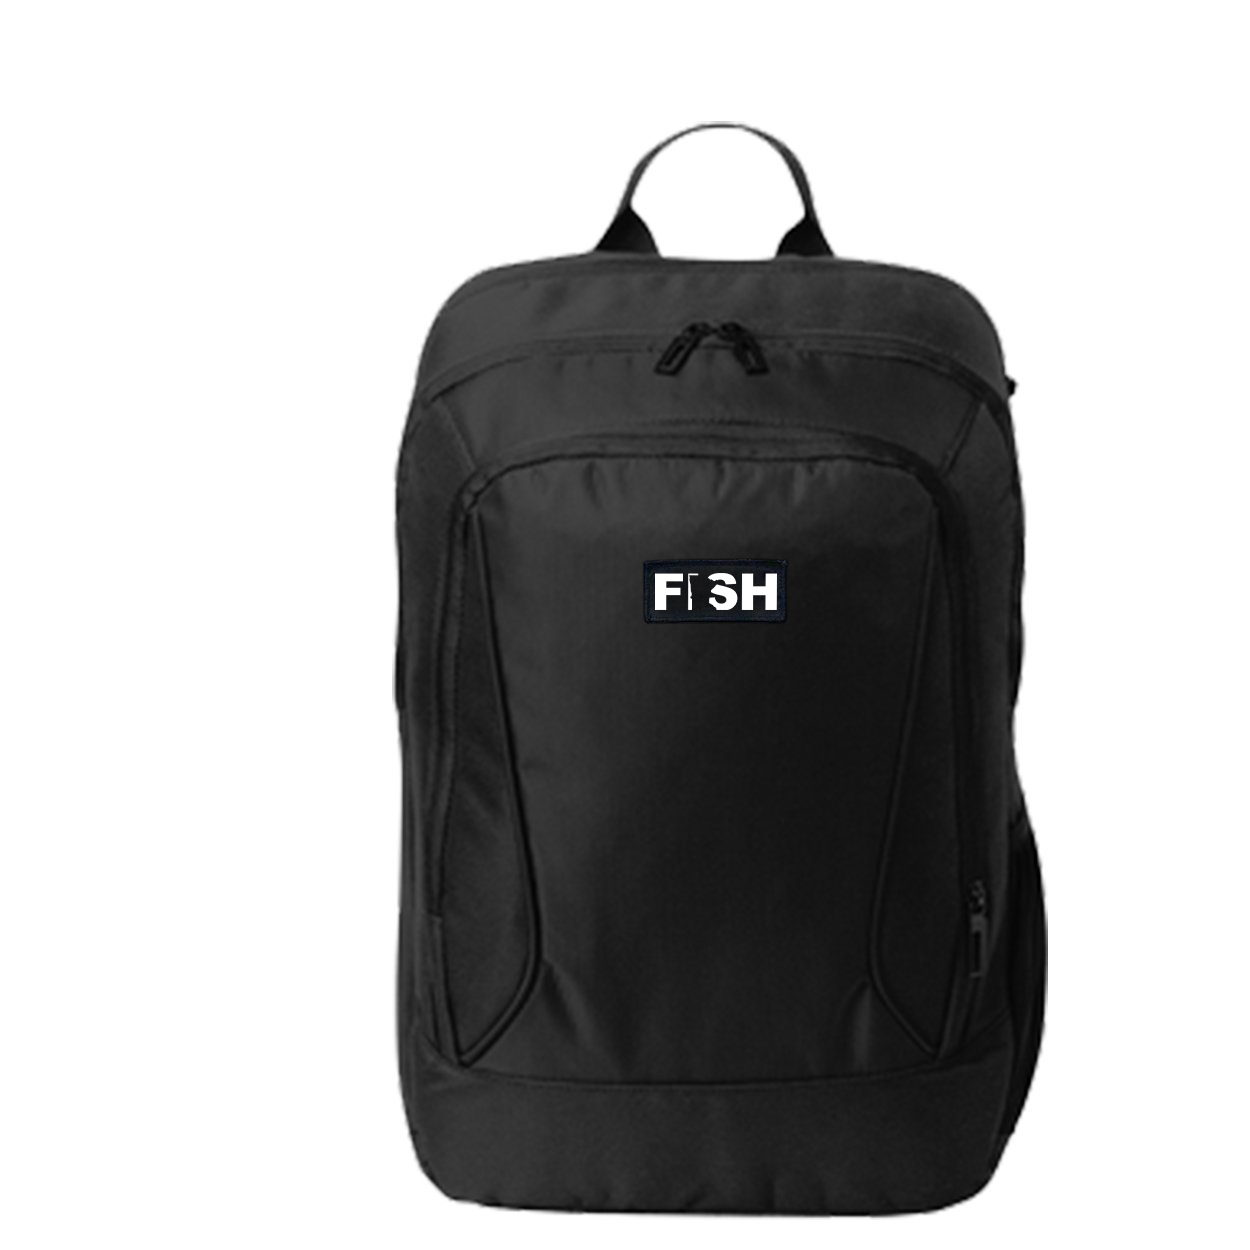 Fish Minnesota Night Out Woven Patch City Backpack Black (White Logo)